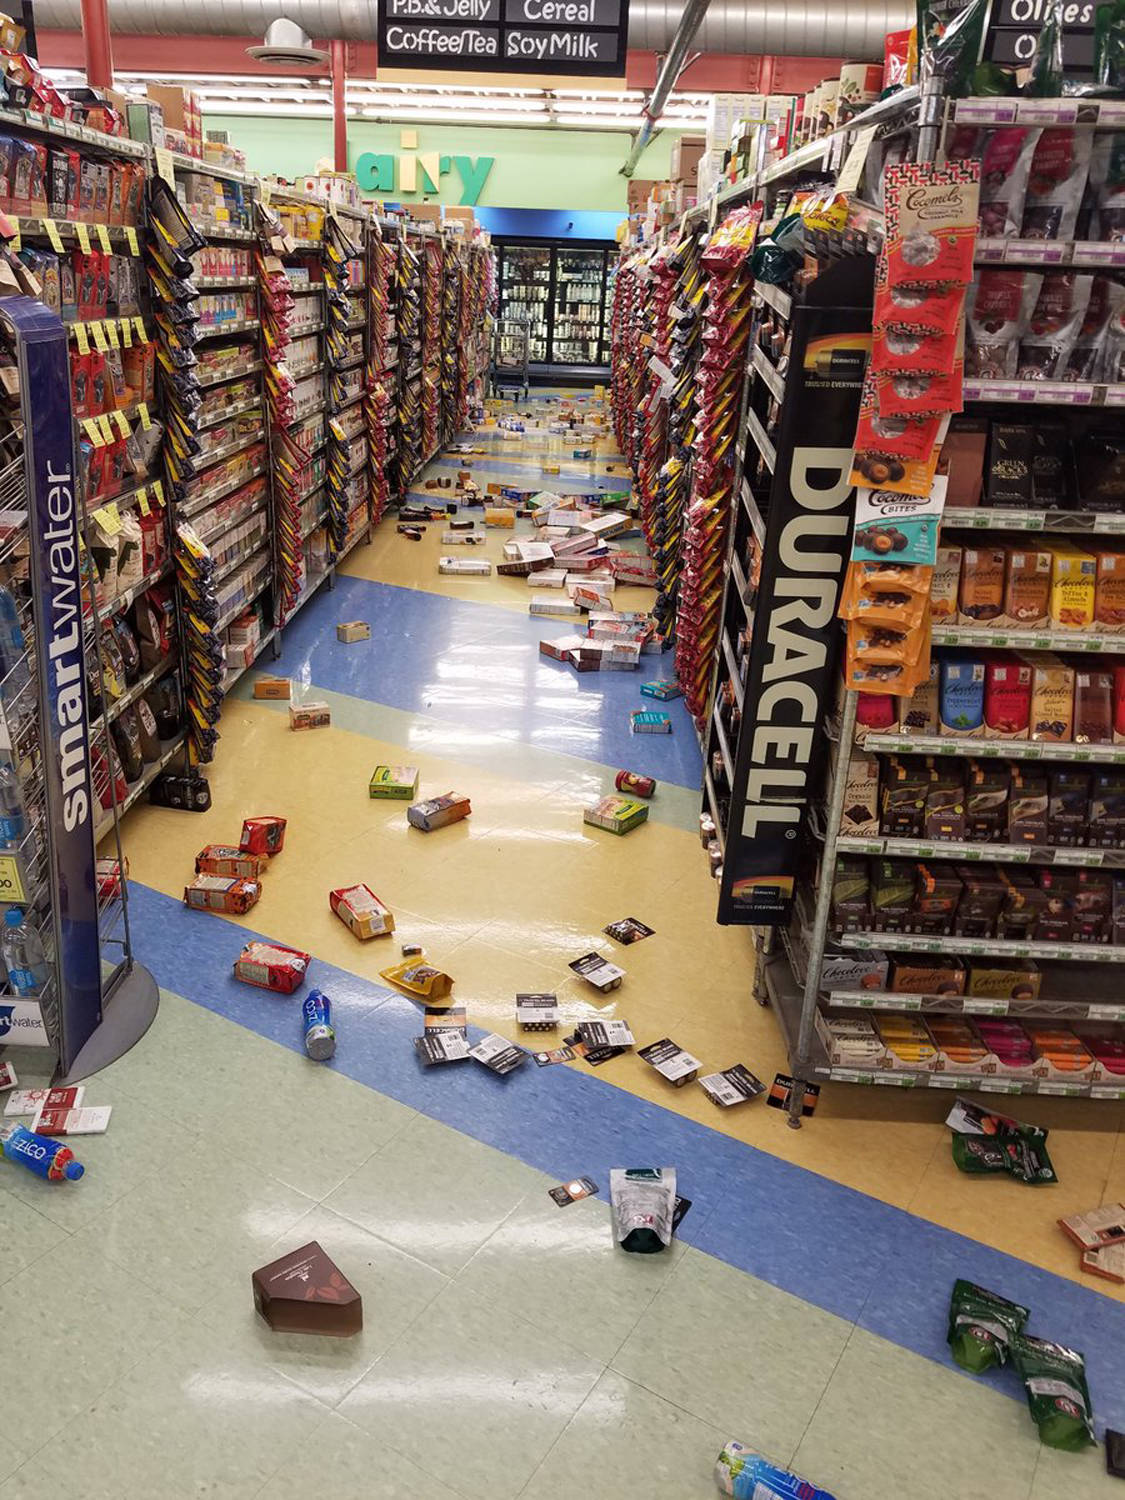 This photo provided by David Harper shows merchandise that fell off the shelves during an earthquake at a store in Anchorage, Alaska, on Friday, Nov. 30, 2018. Back-to-back earthquakes measuring 7.0 and 5.8 rocked buildings and buckled roads Friday morning in Anchorage, prompting people to run from their offices or seek shelter under office desks, while a tsunami warning had authorities urging people to seek higher ground. (Photo by David Harper via AP)